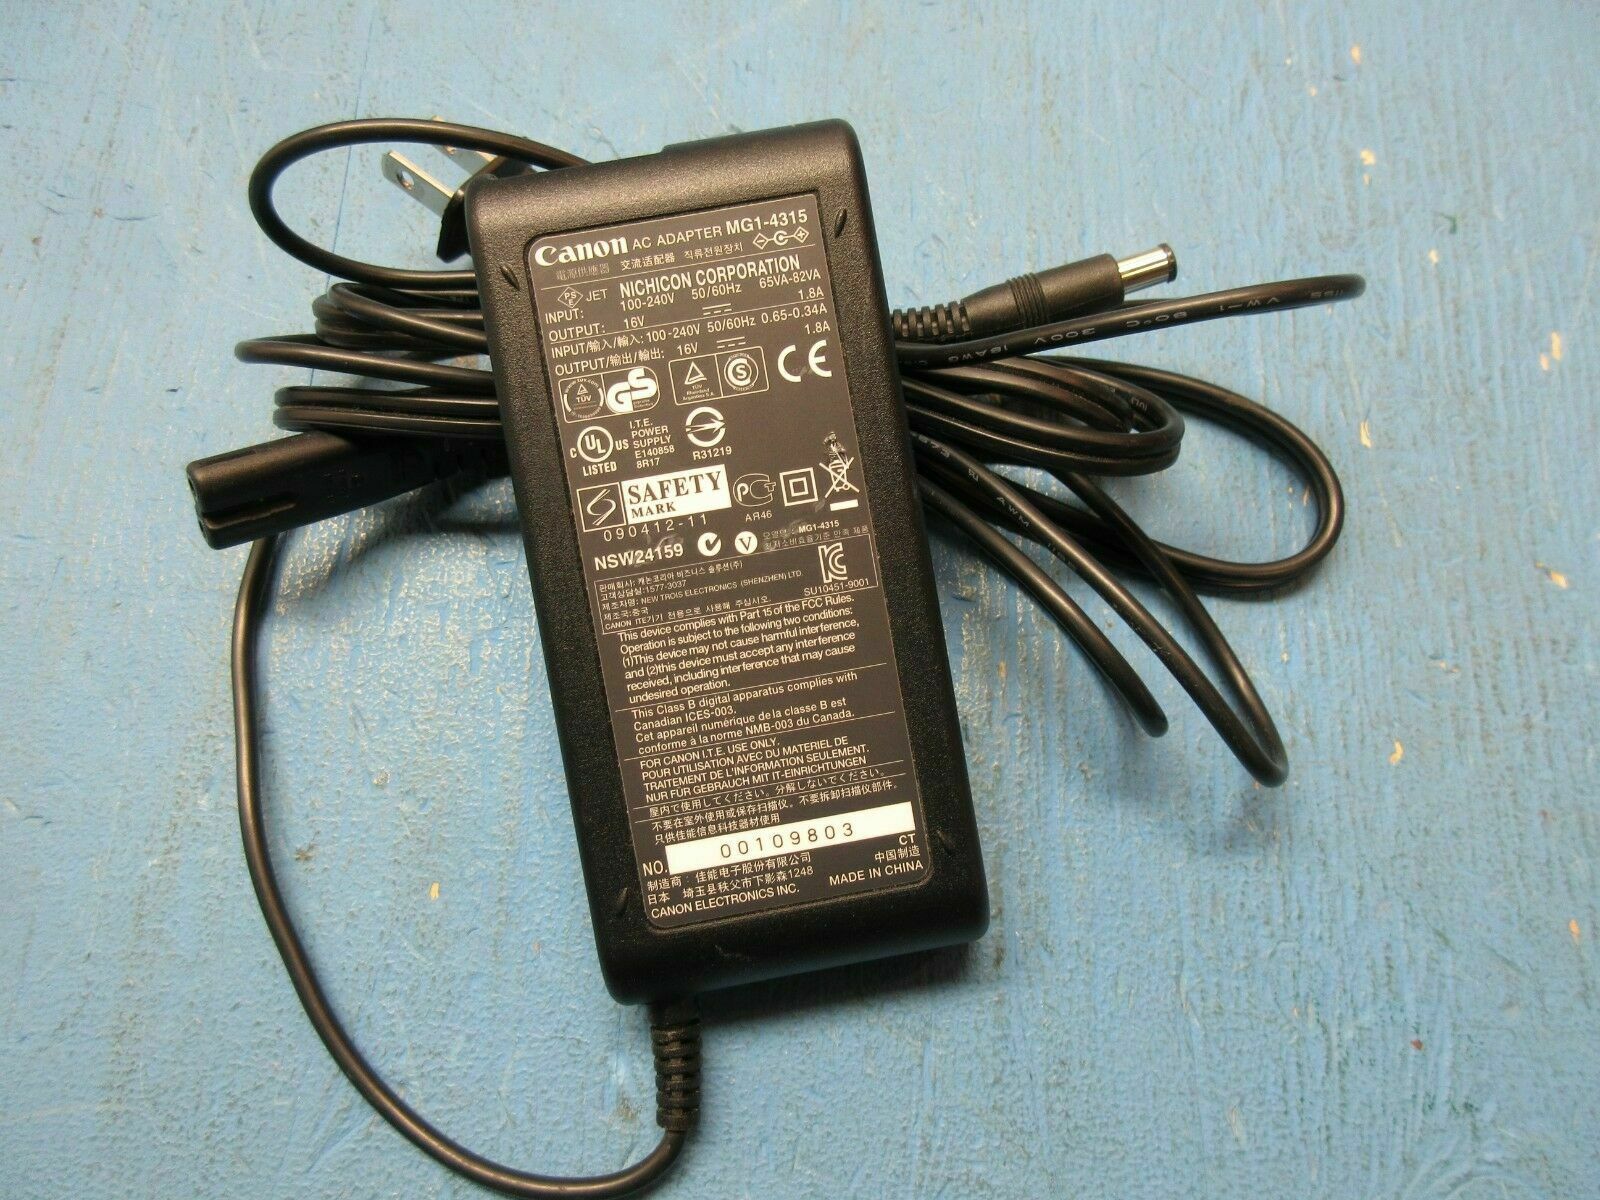 New Genuine Canon MG1-4315 16V 1.8A AC Adapter Power Supply For image FORMULA Scanner